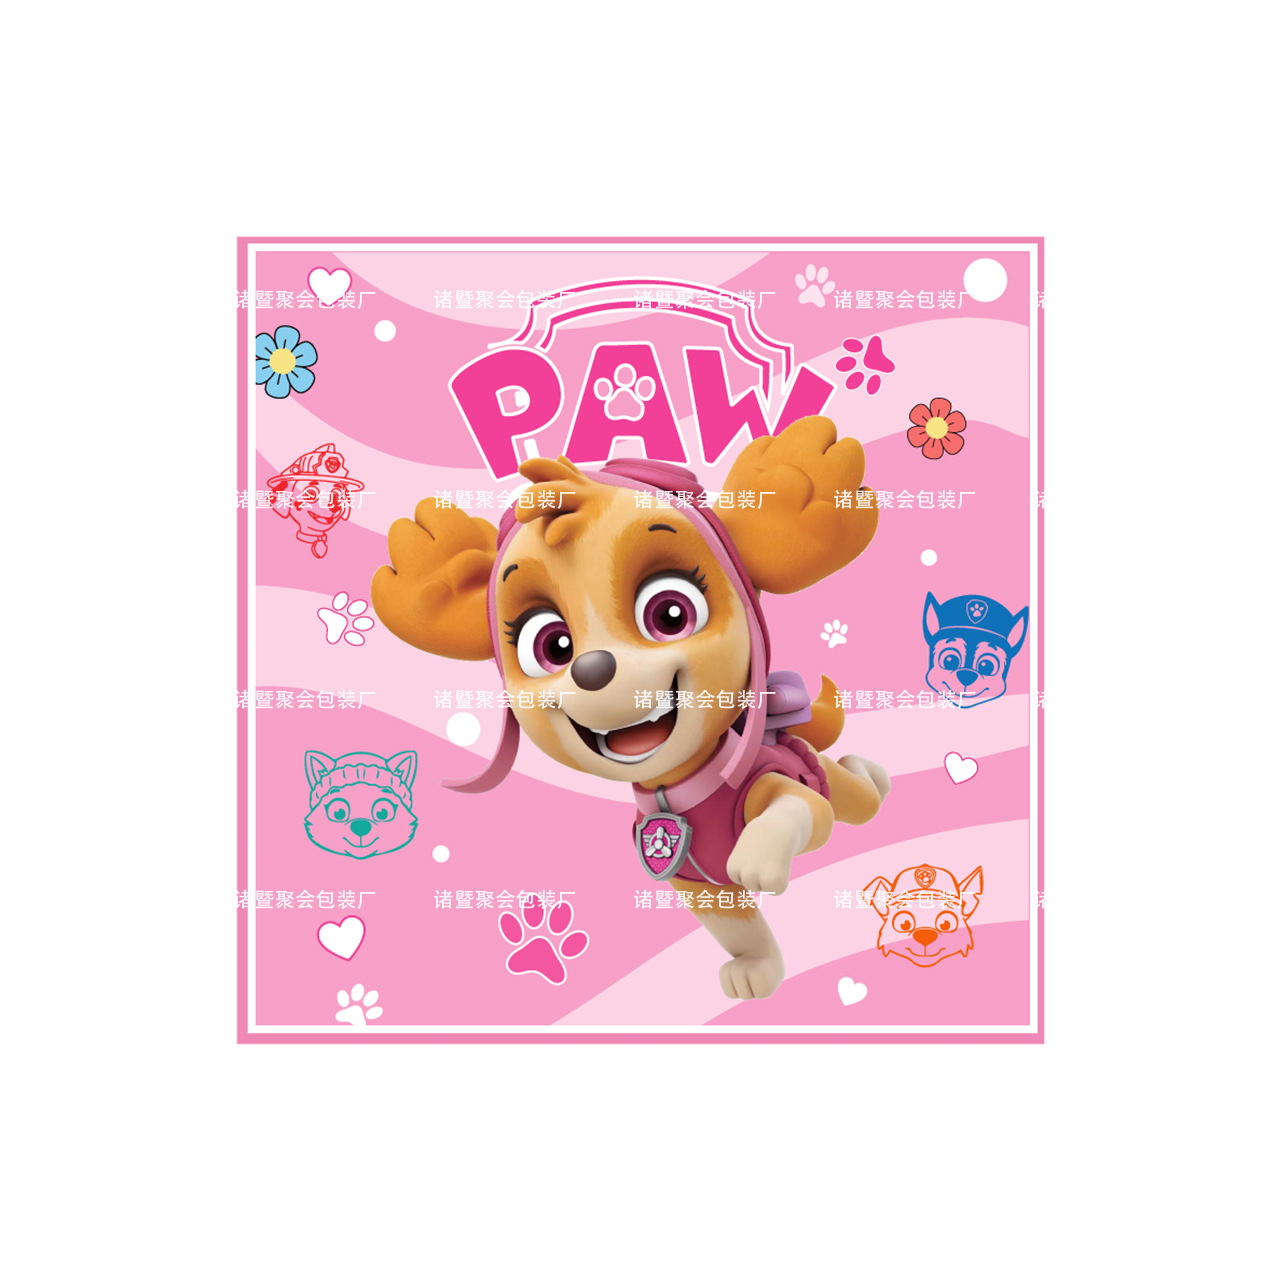 PAW Patrol Pink Skye Birthday Decoration Children Girl Tableware Paper Plate Cup Napkins Baby Shower Party 4 - Paw Patrol Plush